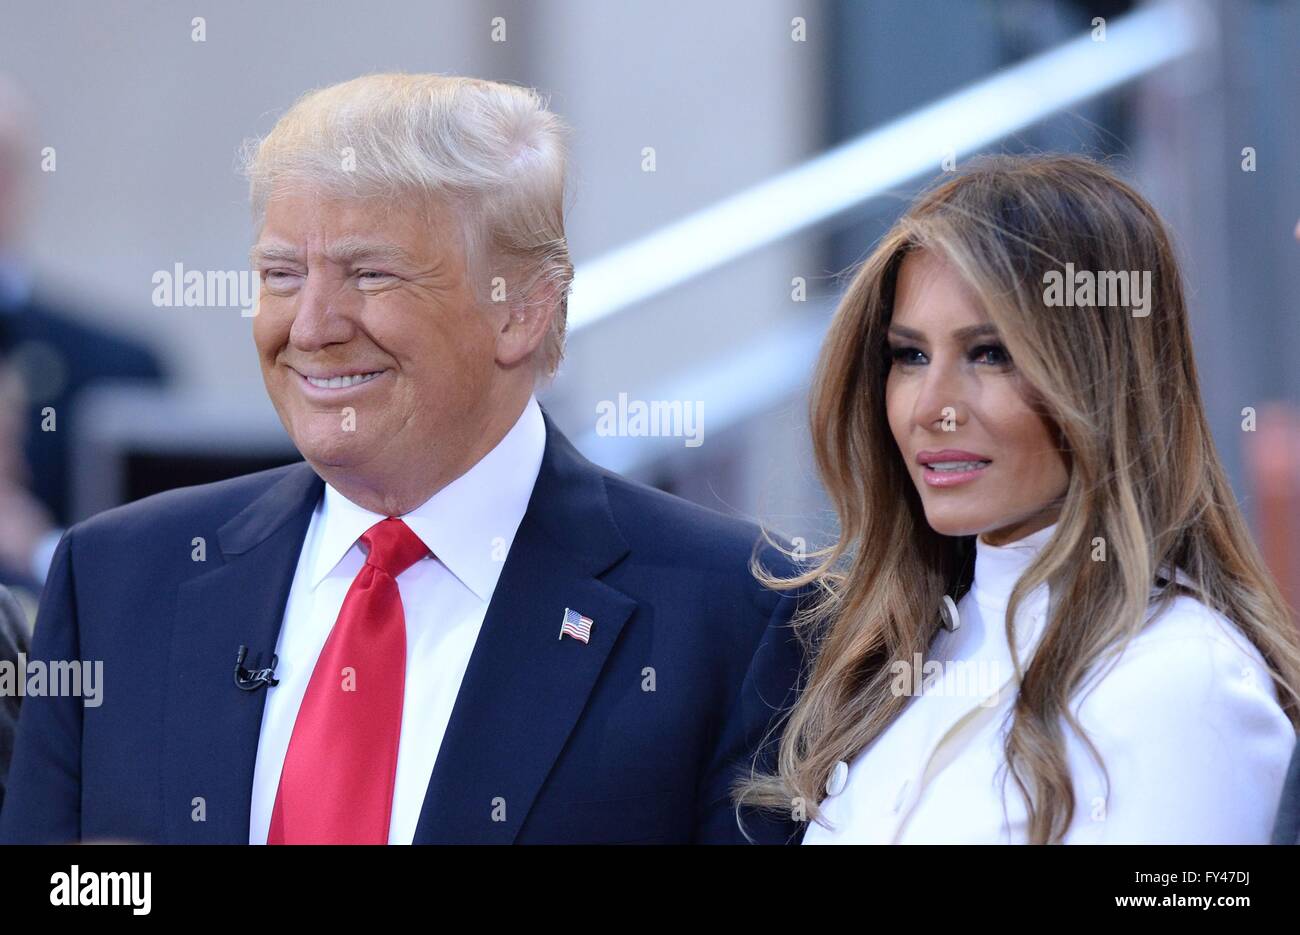 New York, NY, USA. 21st Apr, 2016. Donald Trump, Melania Trump in attendance for Donald Trump Town Hall on the NBC Today Show, Rockefeller Plaza, New York, NY April 21, 2016. Credit:  Kristin Callahan/Everett Collection/Alamy Live News Stock Photo